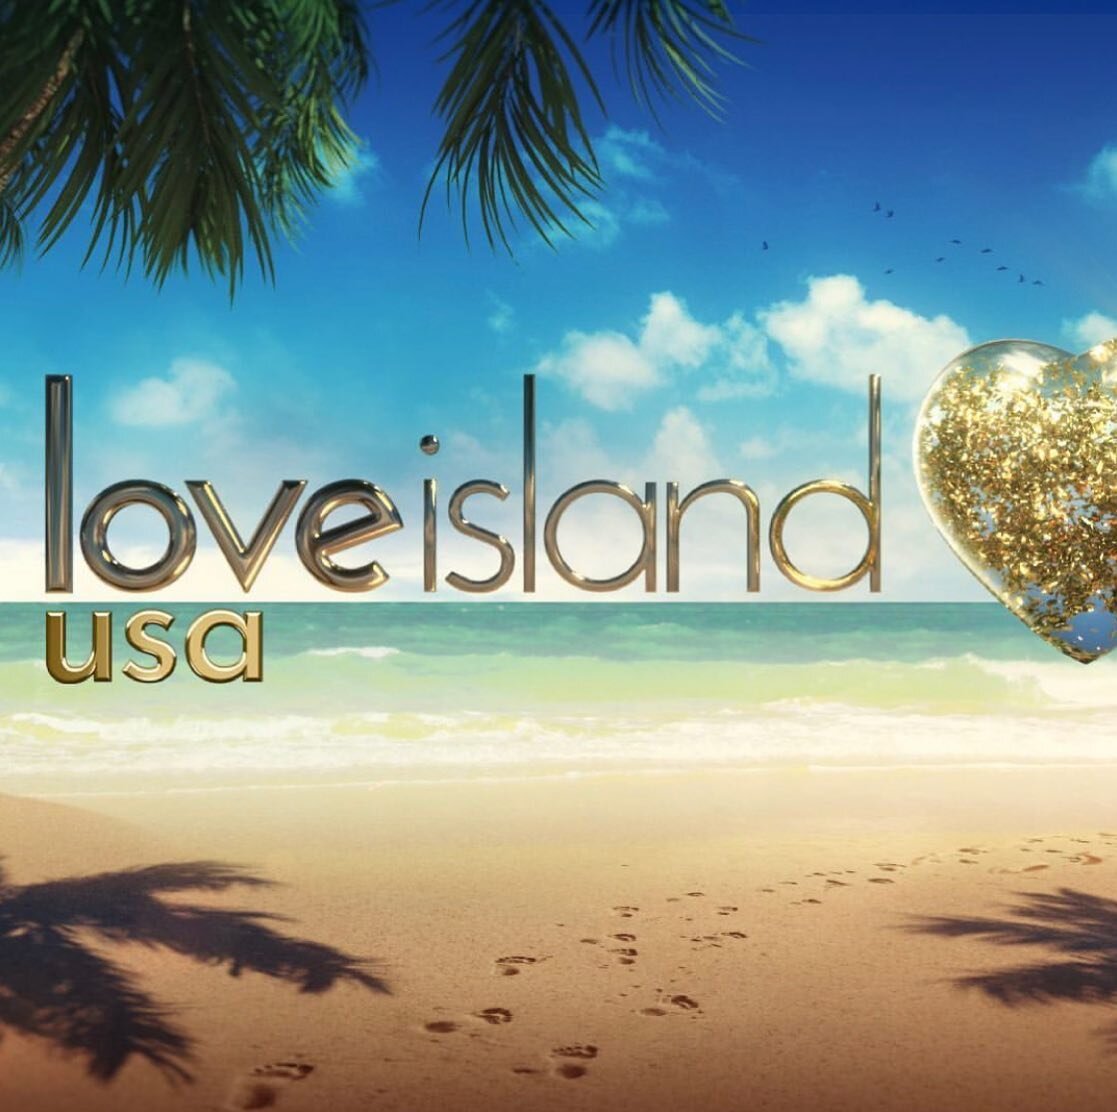 Look for &ldquo;Let&rsquo;s Do It&rdquo; by @officialalltalk on @loveislandusa # vocals by @paigeblue and co-written with @beatsbybreakfast @malibubabie  #🙏🏼🙏🏼🙏🏼